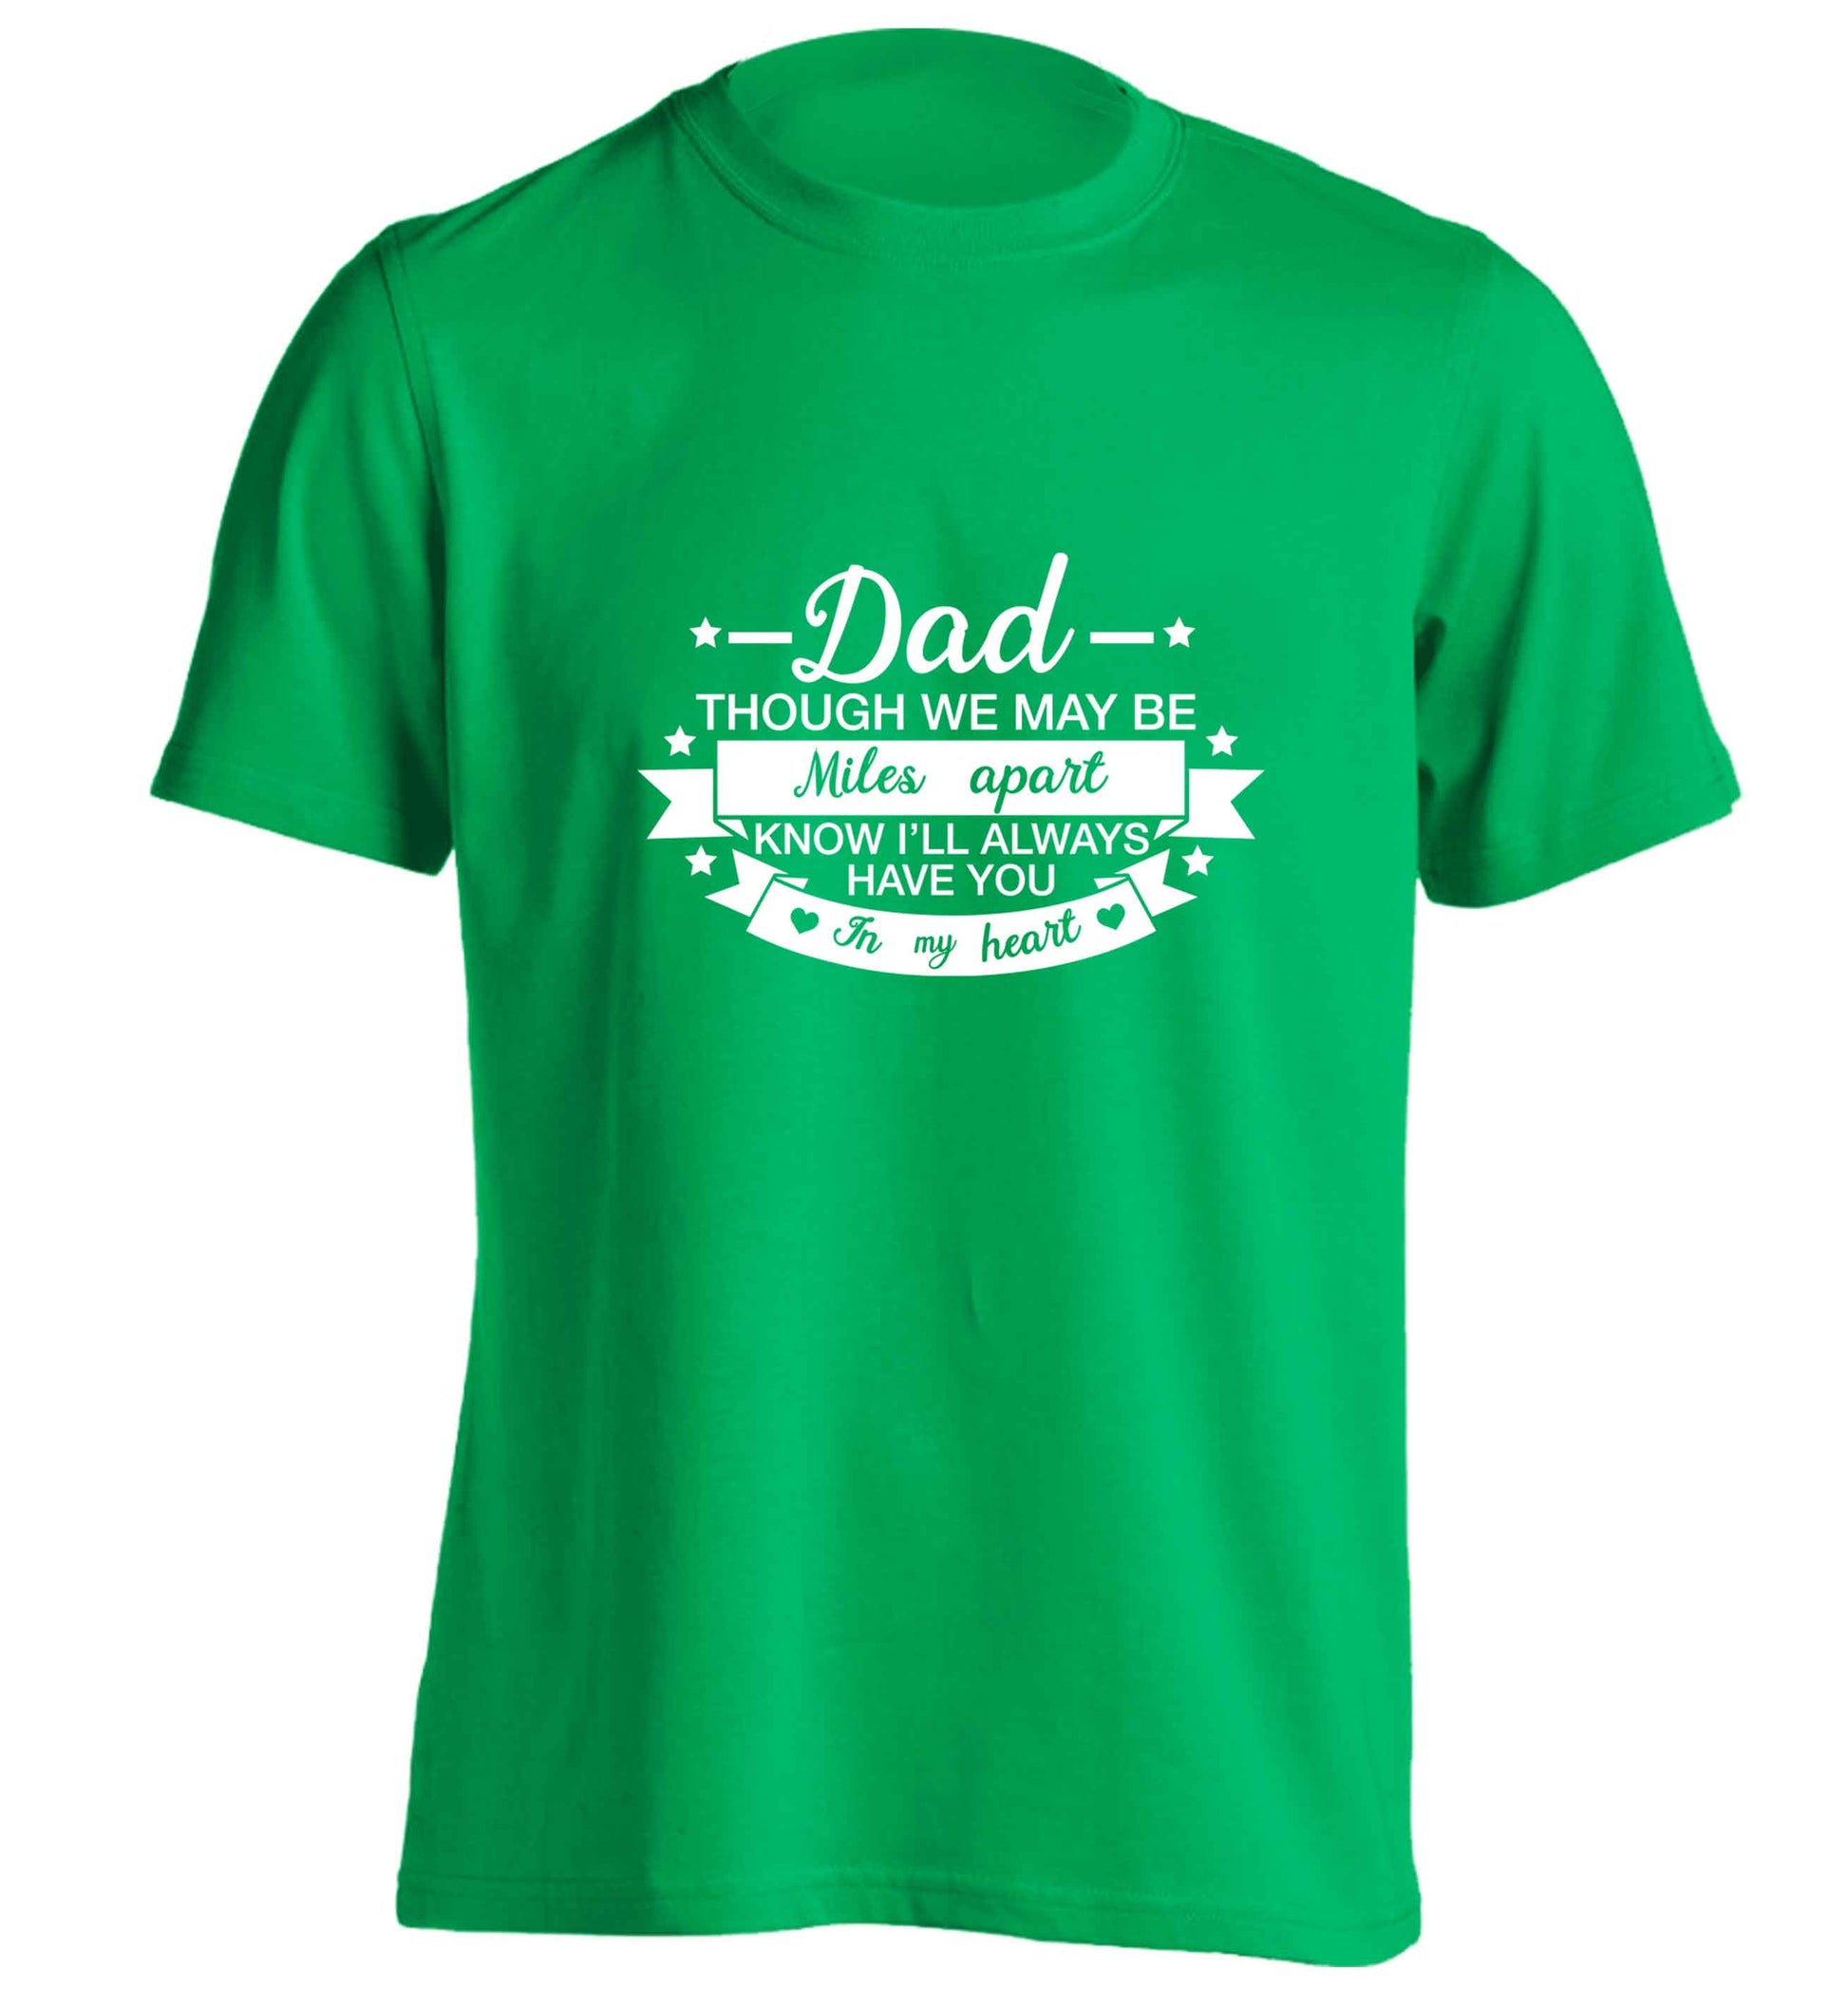 Dad though we are miles apart know I'll always have you in my heart adults unisex green Tshirt 2XL